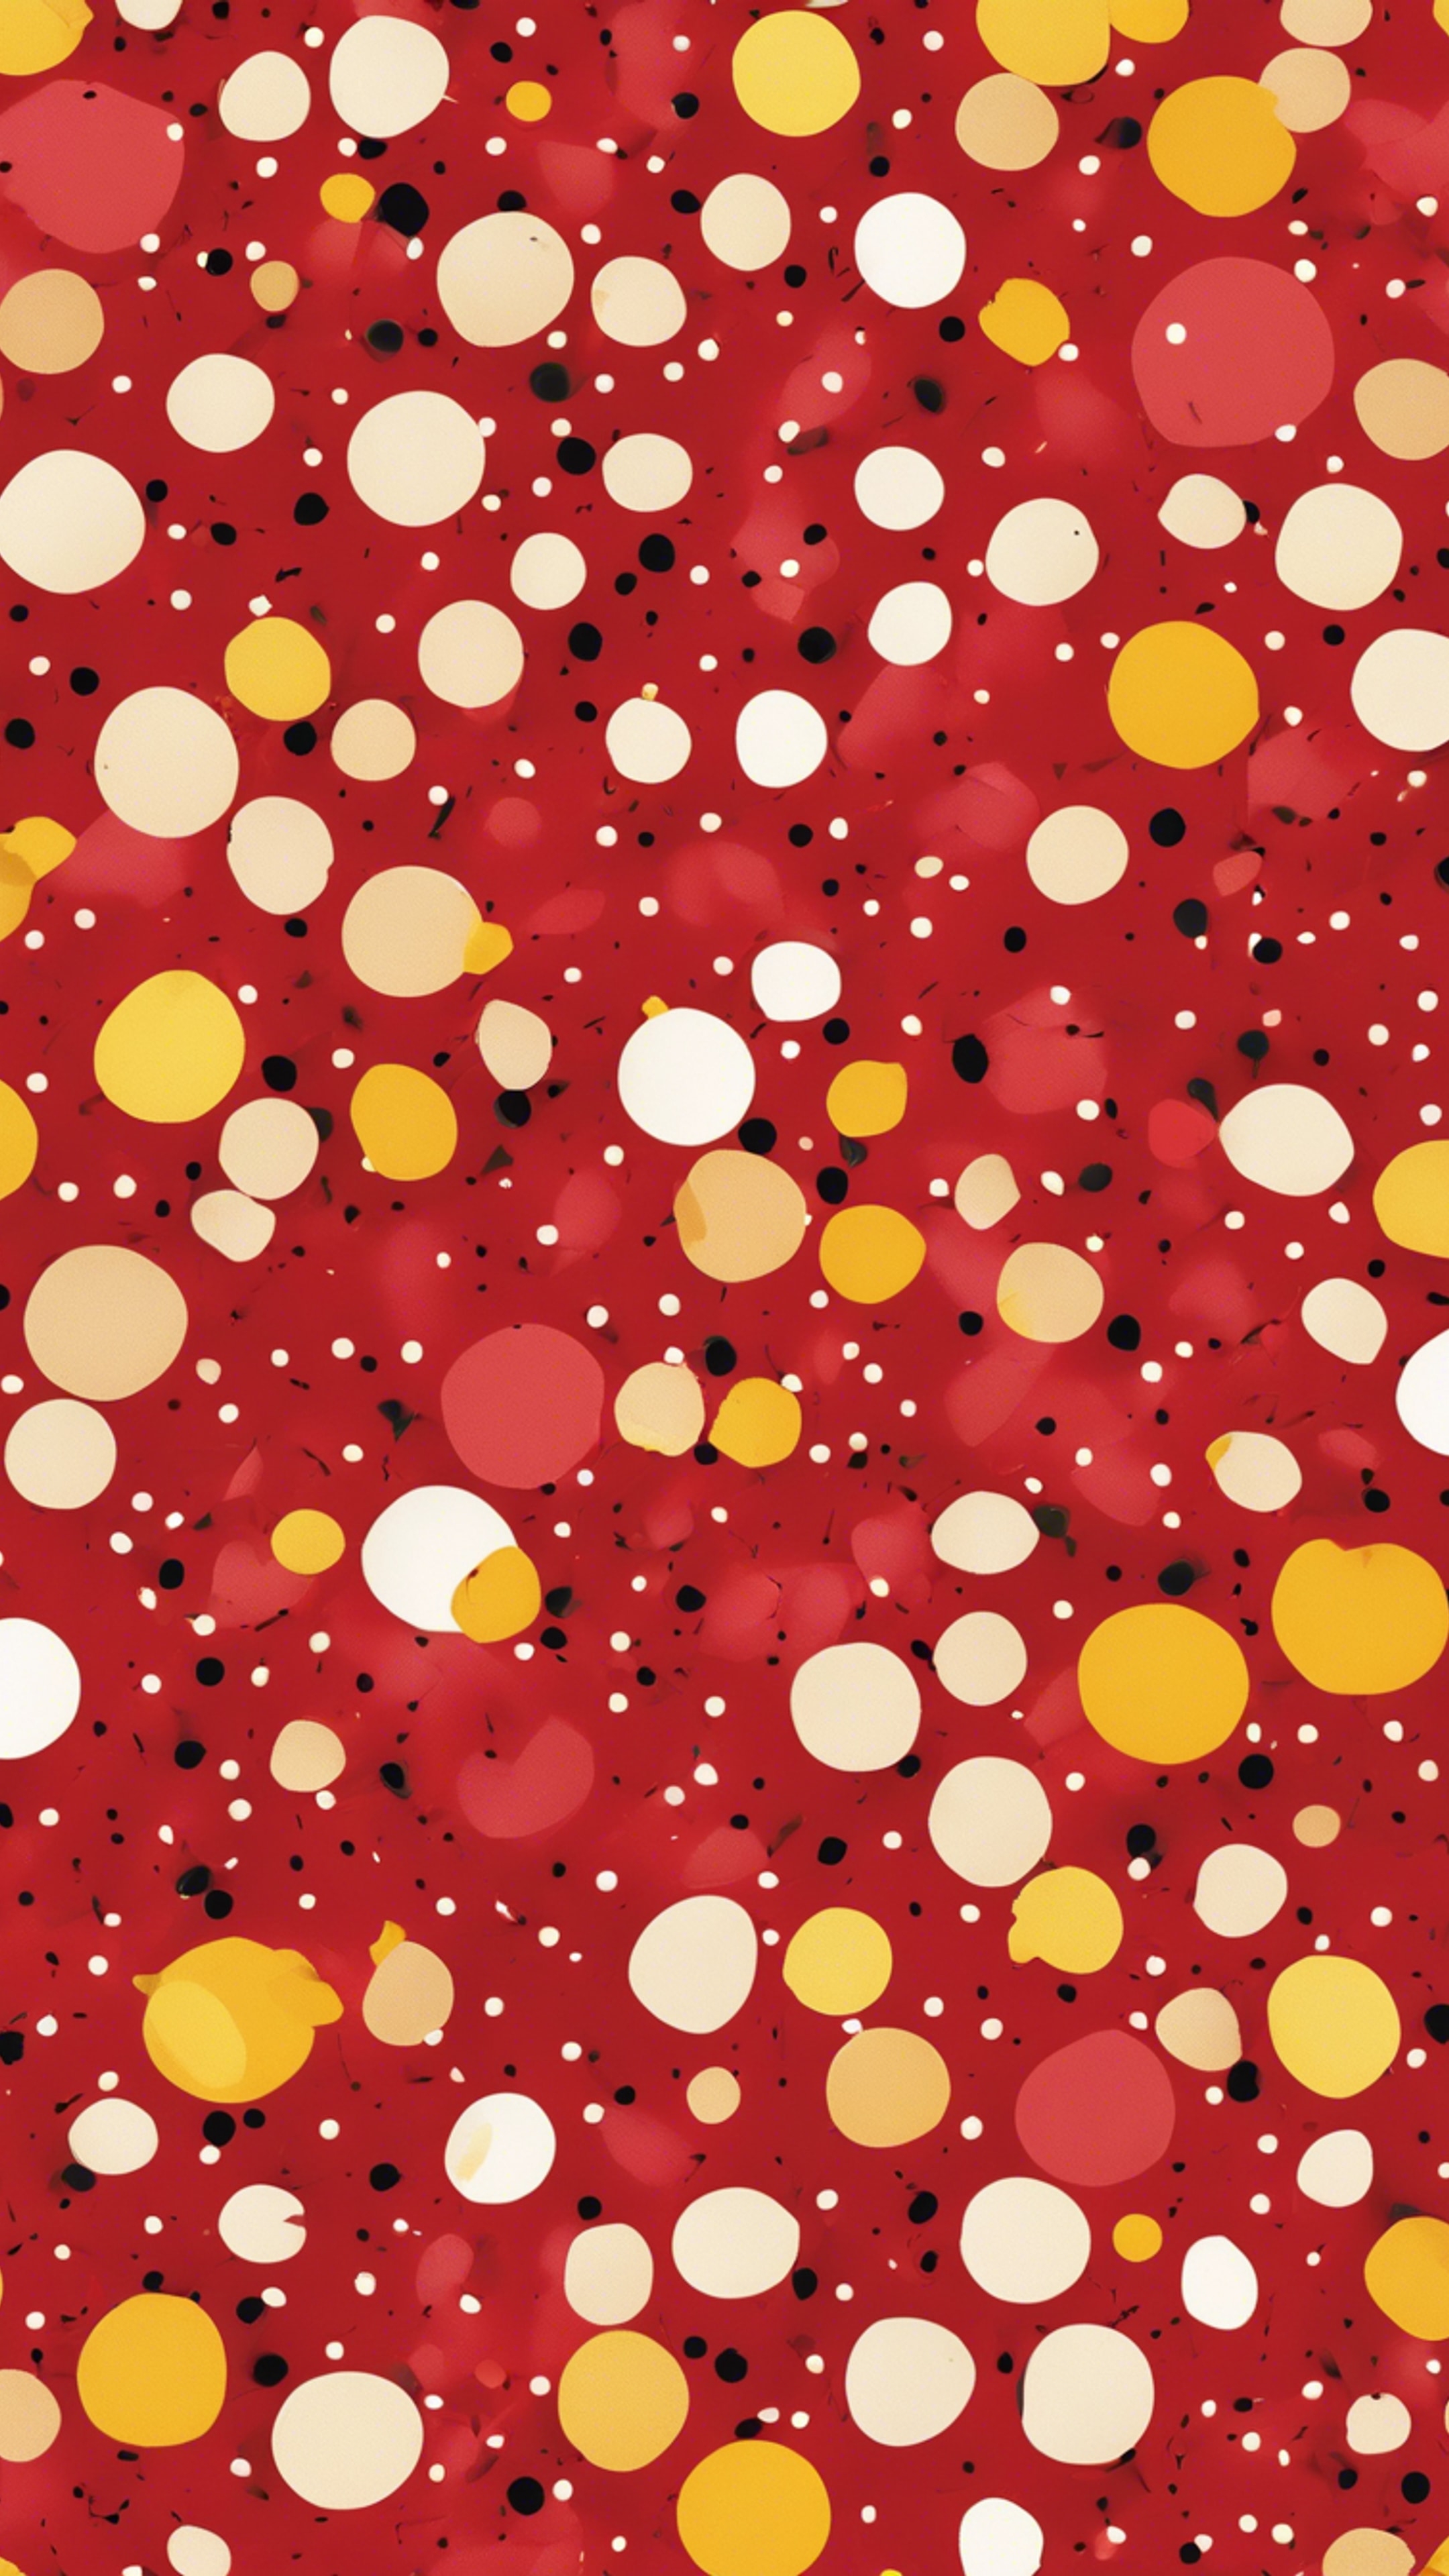 A seamless pattern of vibrant red and vivid yellow, polka dots scattered randomly. Ταπετσαρία[206bafc01adc43569588]